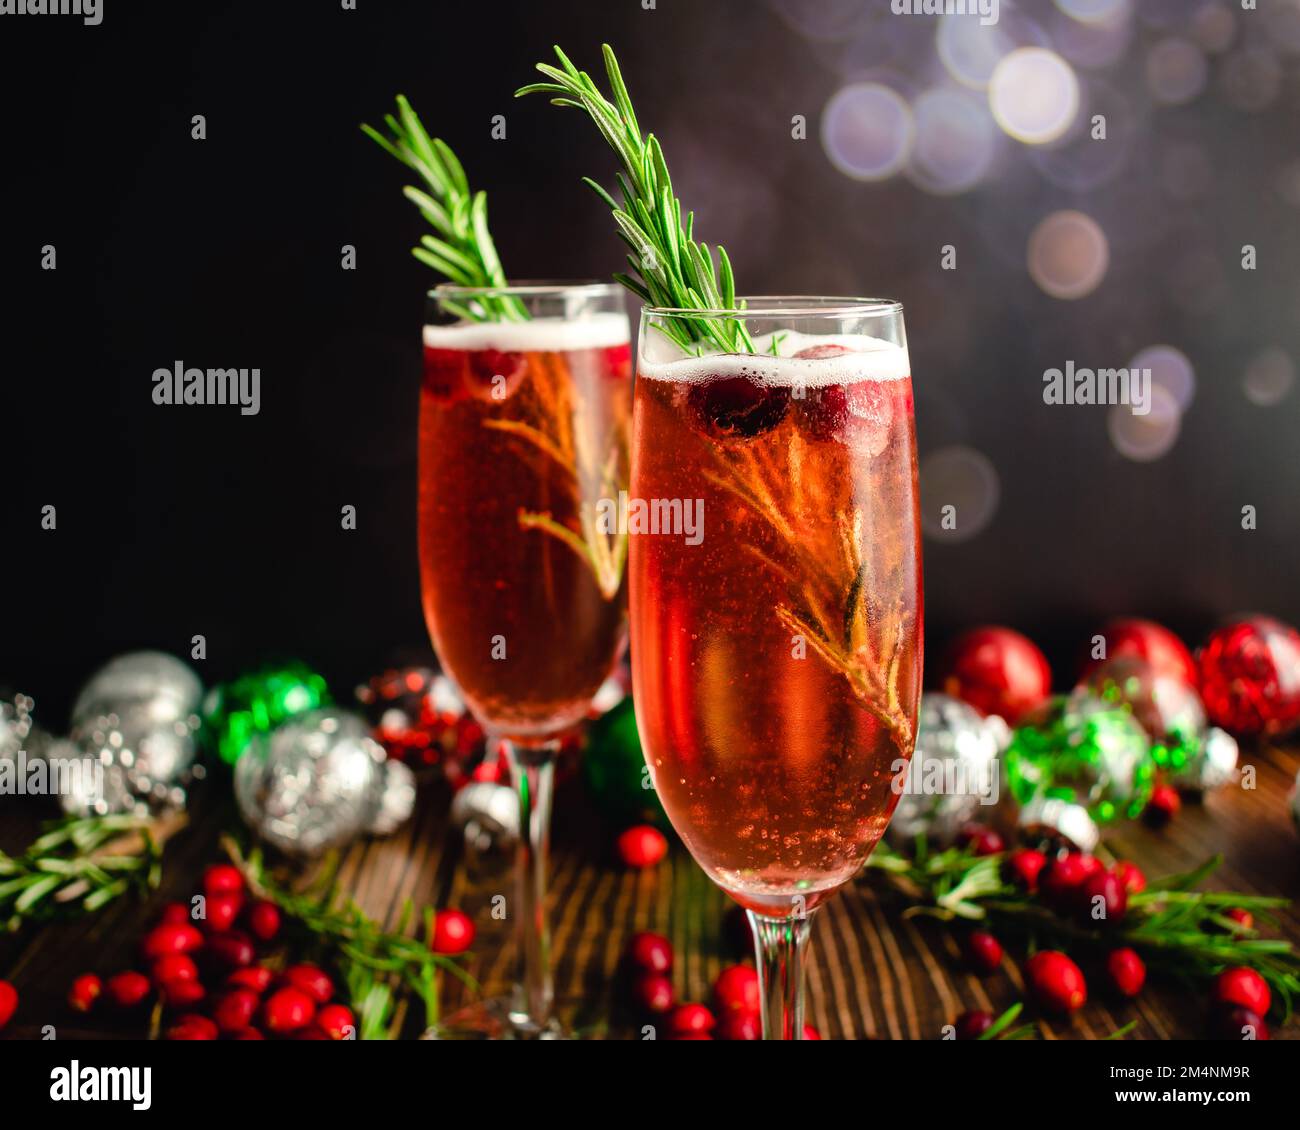 Christmas Mimosas Garnished with Sugared Cranberries and Rosemary: Champagne cocktails made with cranberry juice served in flute glasses Stock Photo